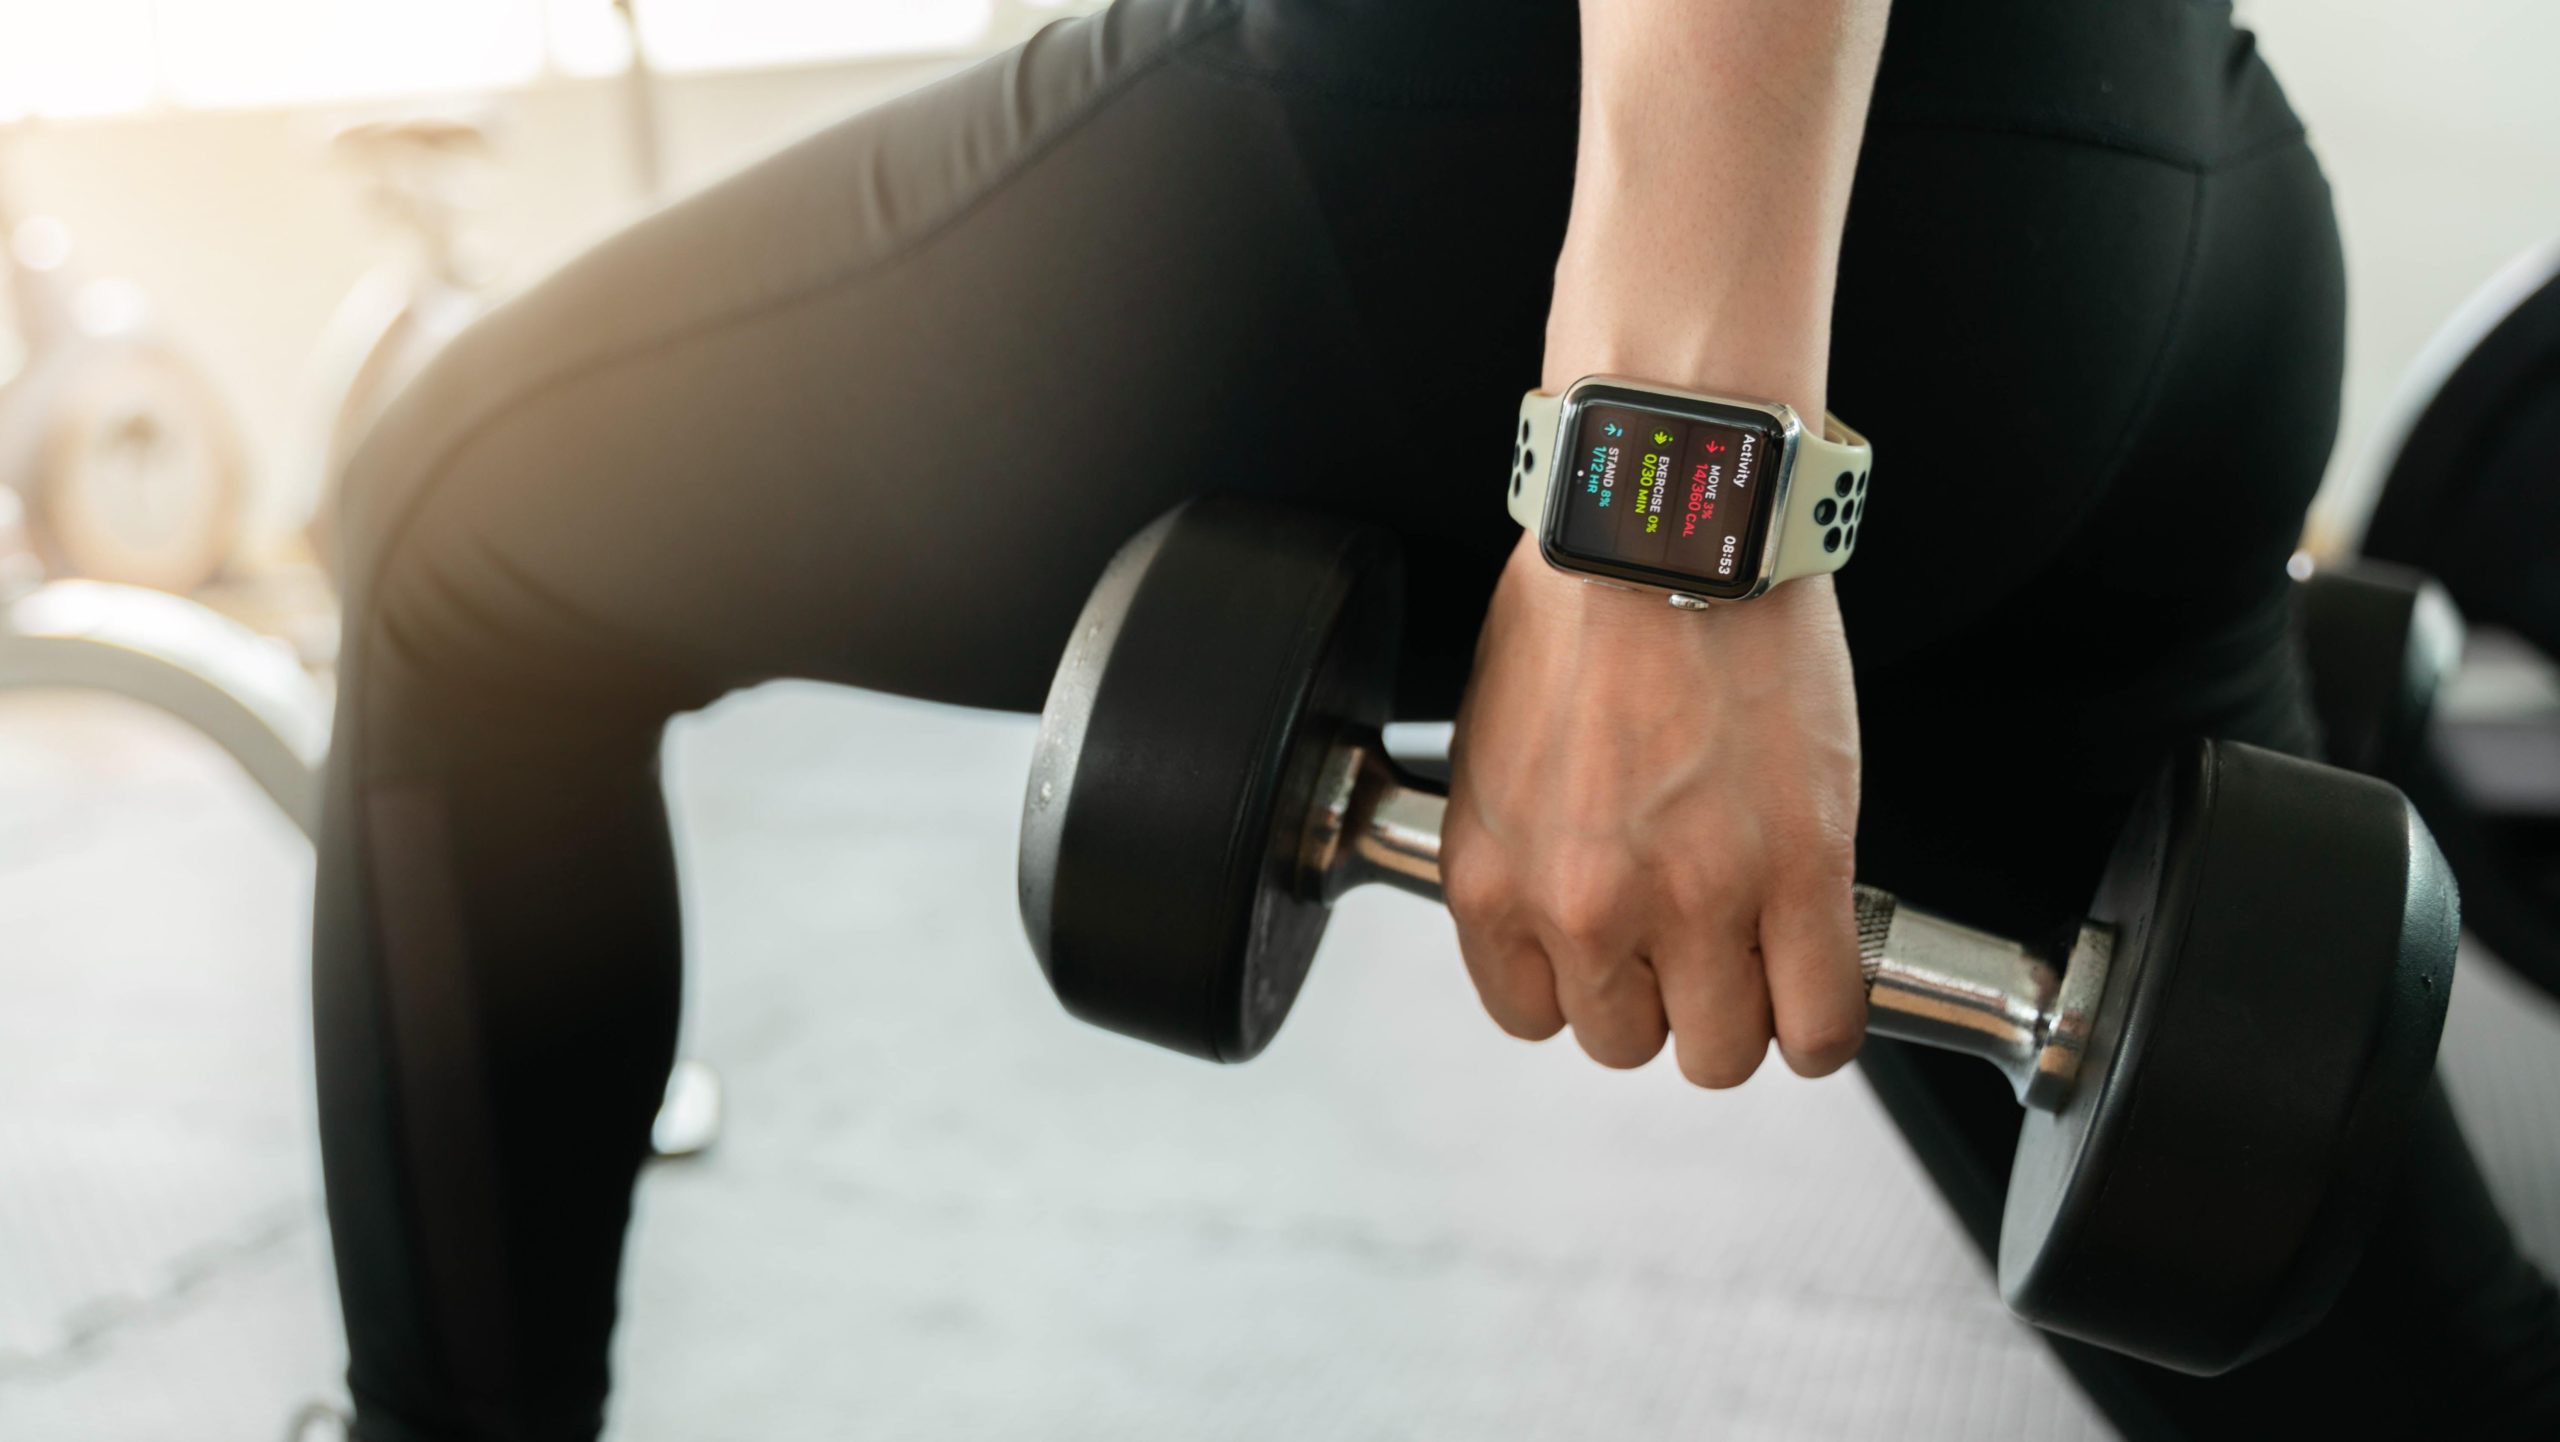 You Should Divide Your Apple Watch Workouts Into Segments